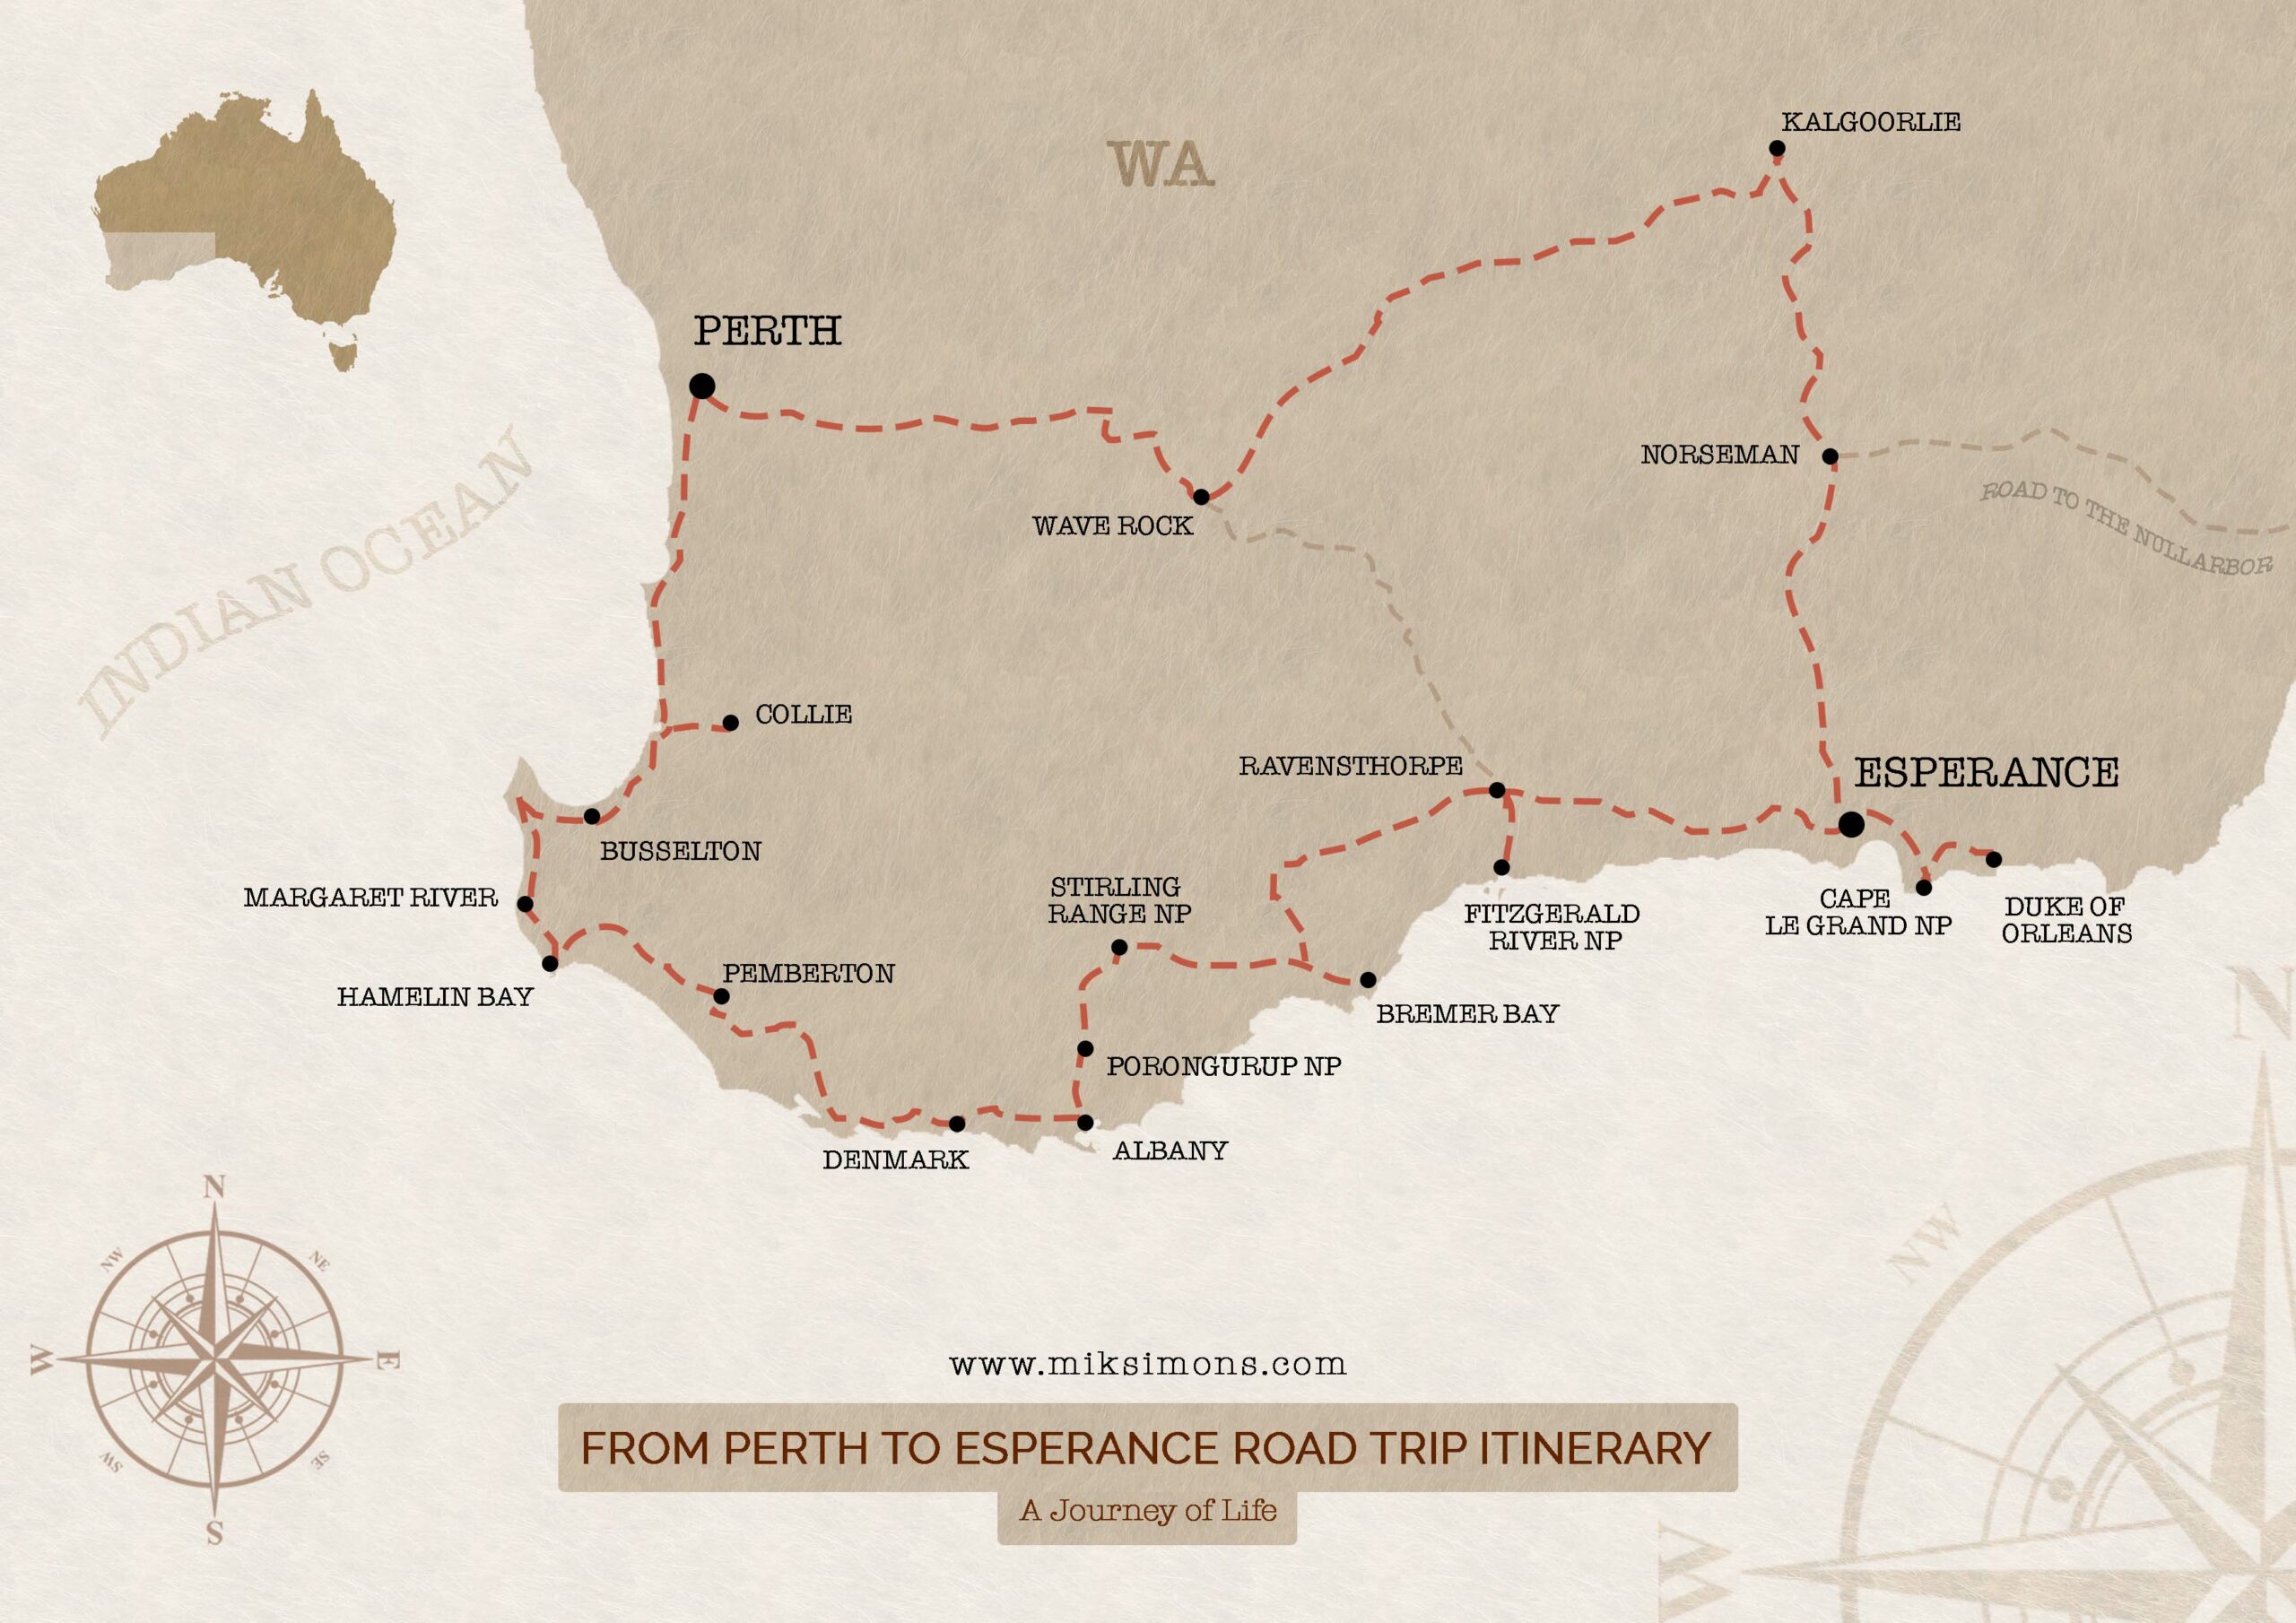 Perth to Esperance 3-week road trip itinerary 2022 - Map of South Western Australia